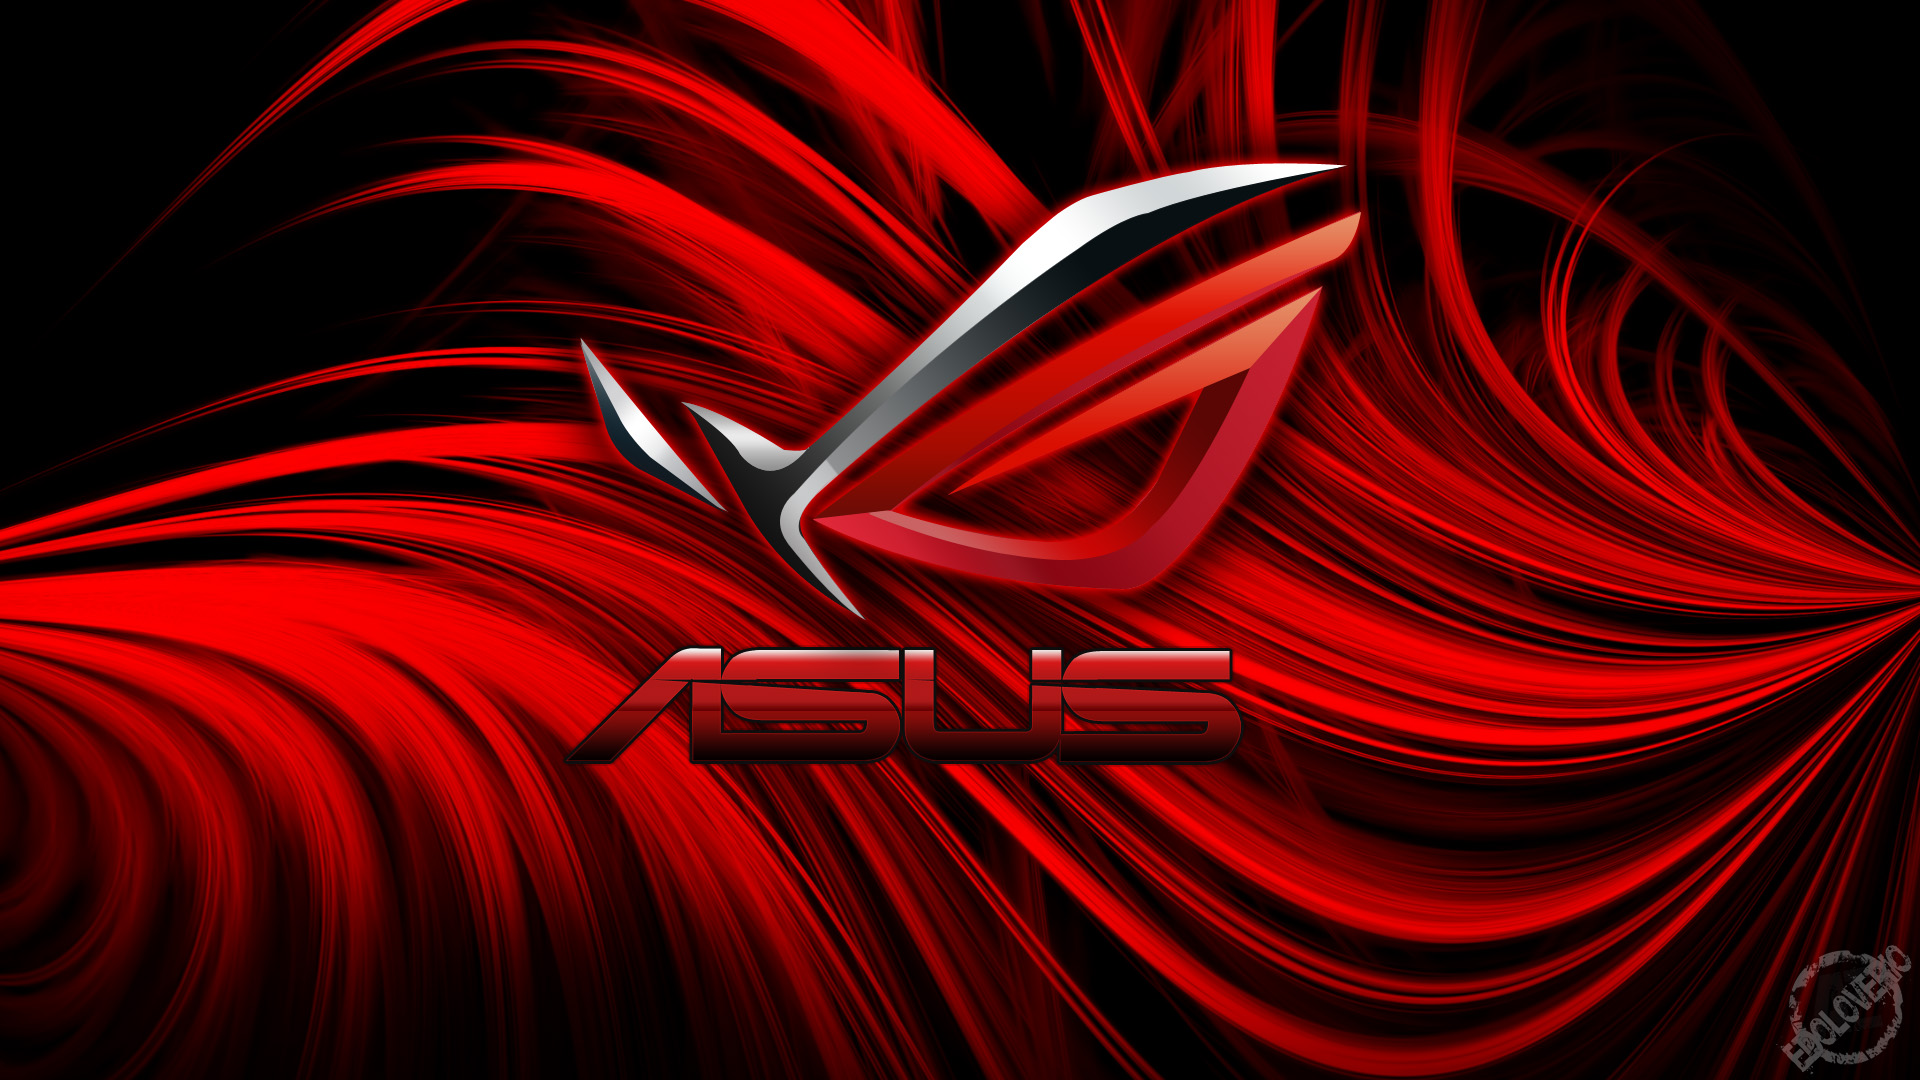 Asus HD Wallpaper | Background Image | 1920x1080